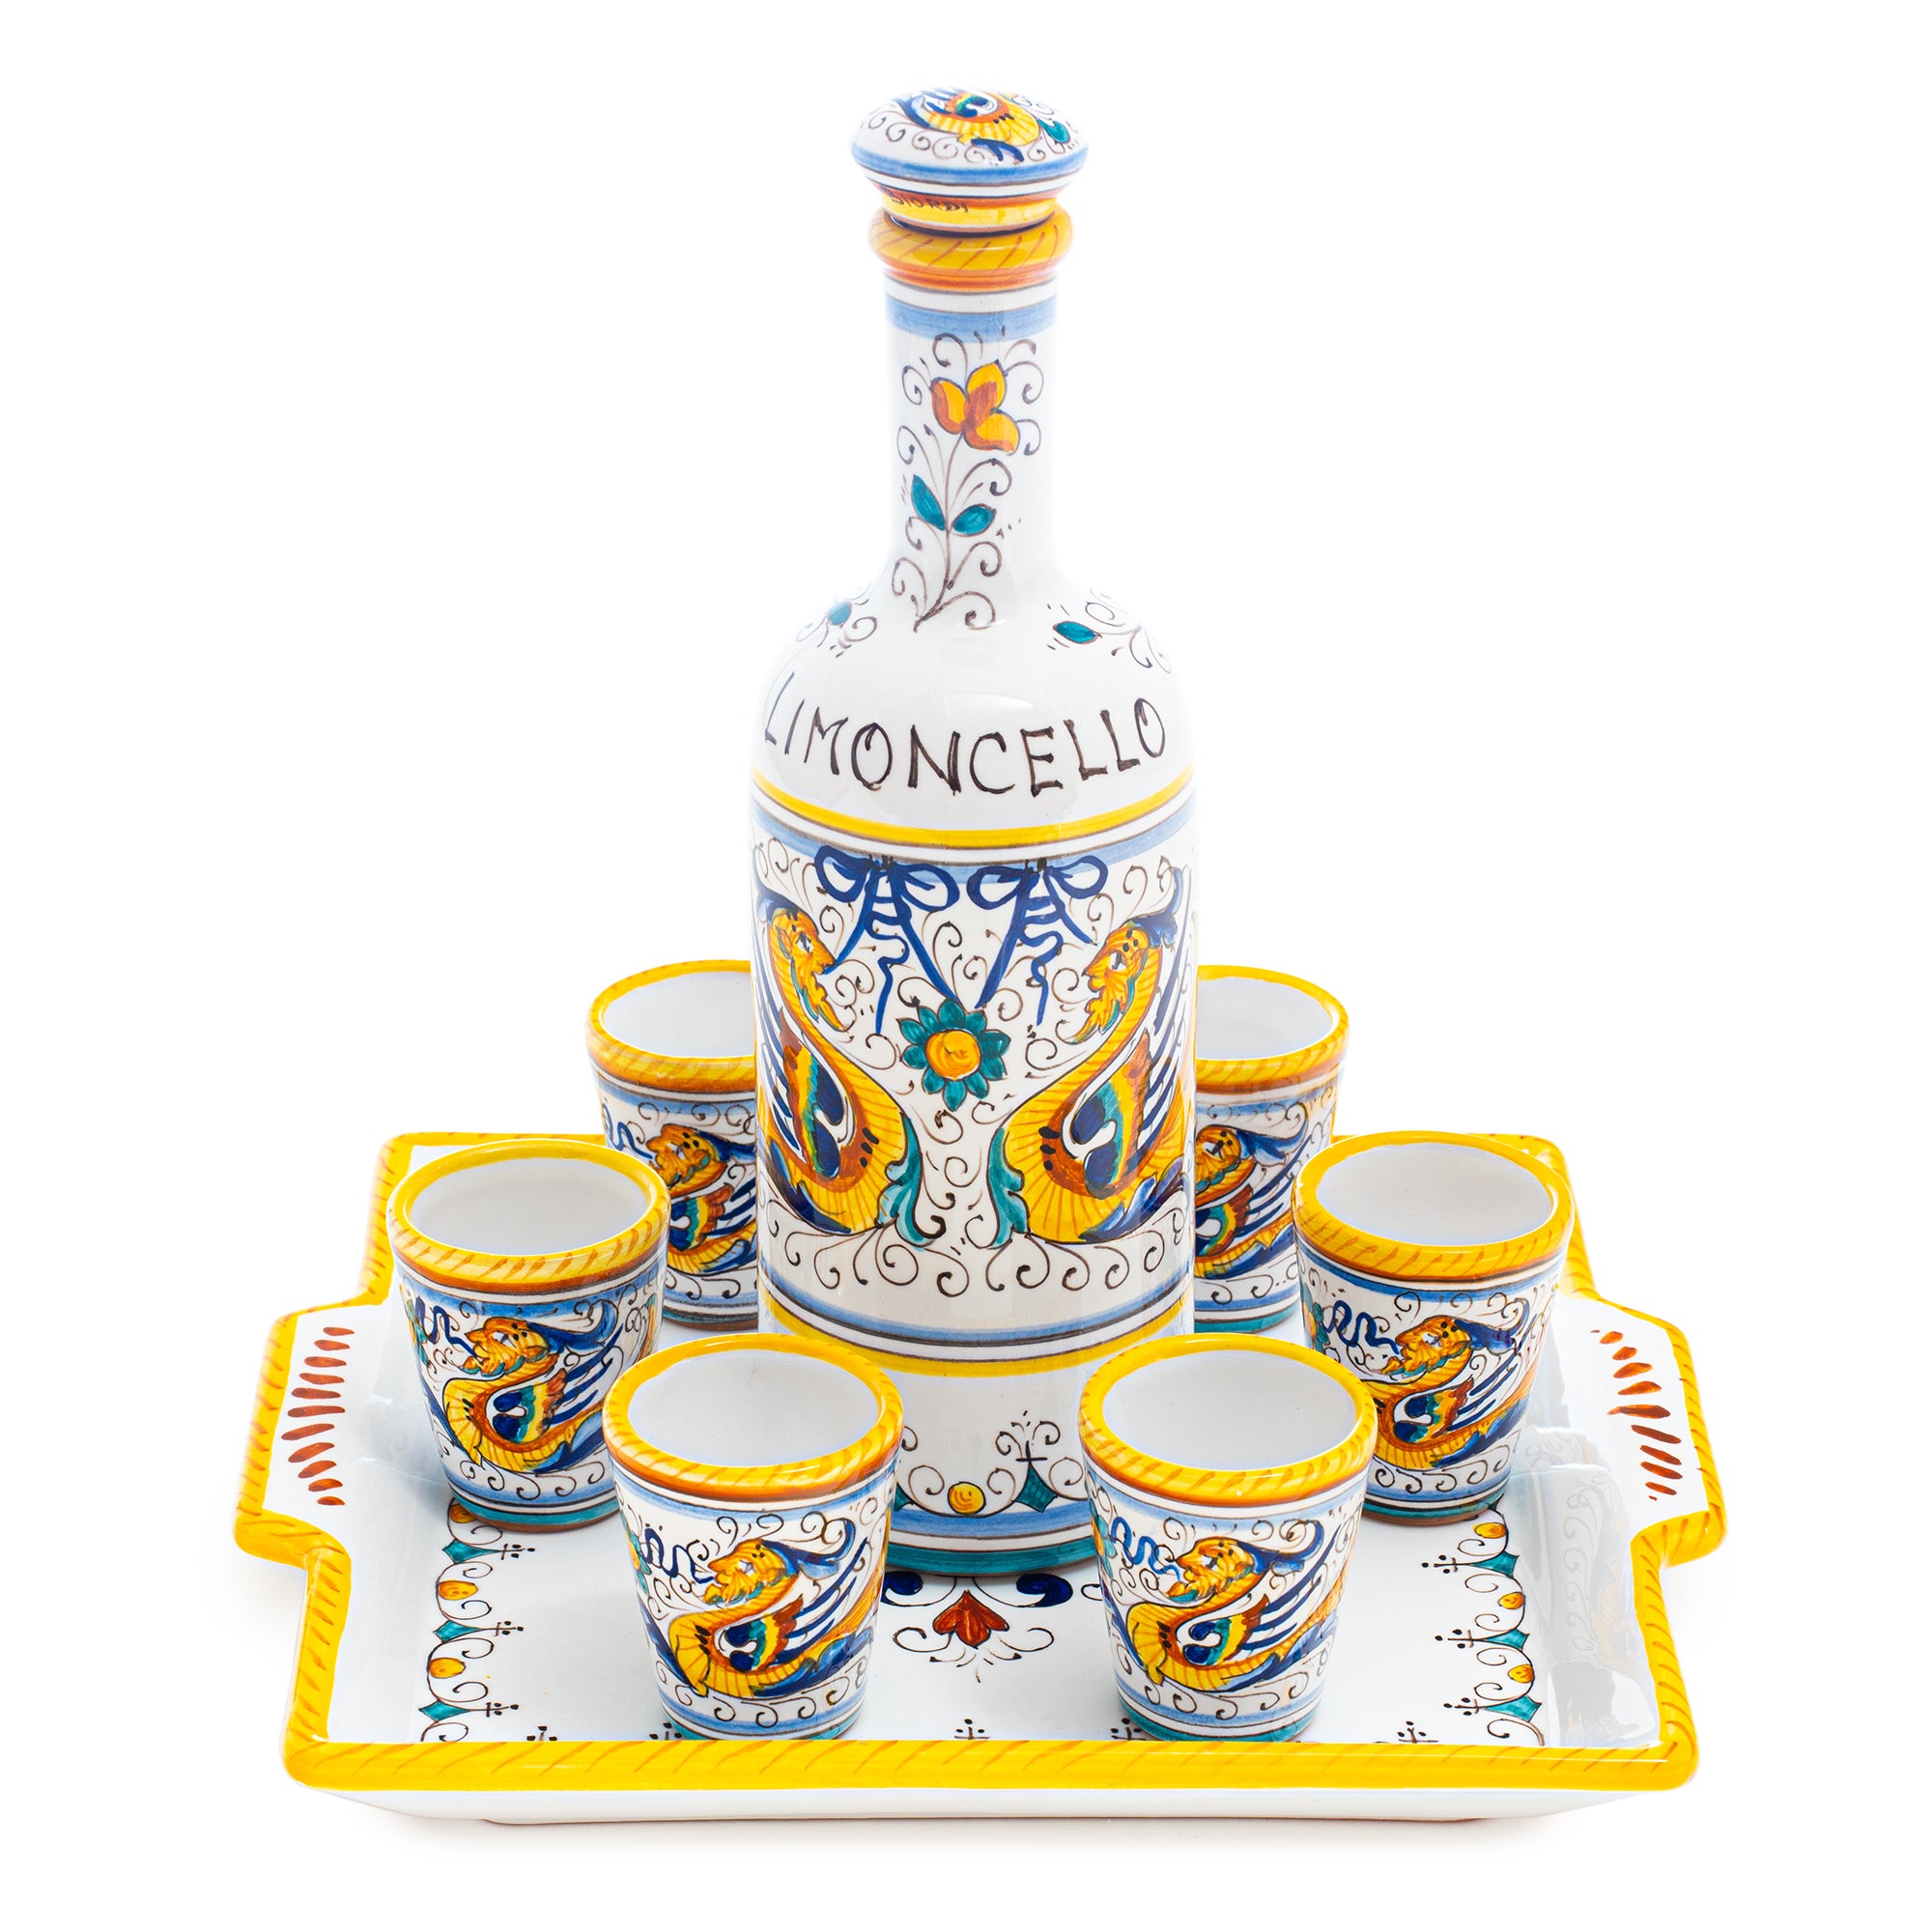 Raffaellesco Limoncello Set, ceramics, pottery, italian design, majolica, handmade, handcrafted, handpainted, home decor, kitchen art, home goods, deruta, majolica, Artisan, treasures, traditional art, modern art, gift ideas, style, SF, shop small business, artists, shop online, landmark store, legacy, one of a kind, limited edition, gift guide, gift shop, retail shop, decorations, shopping, italy, home staging, home decorating, home interiors